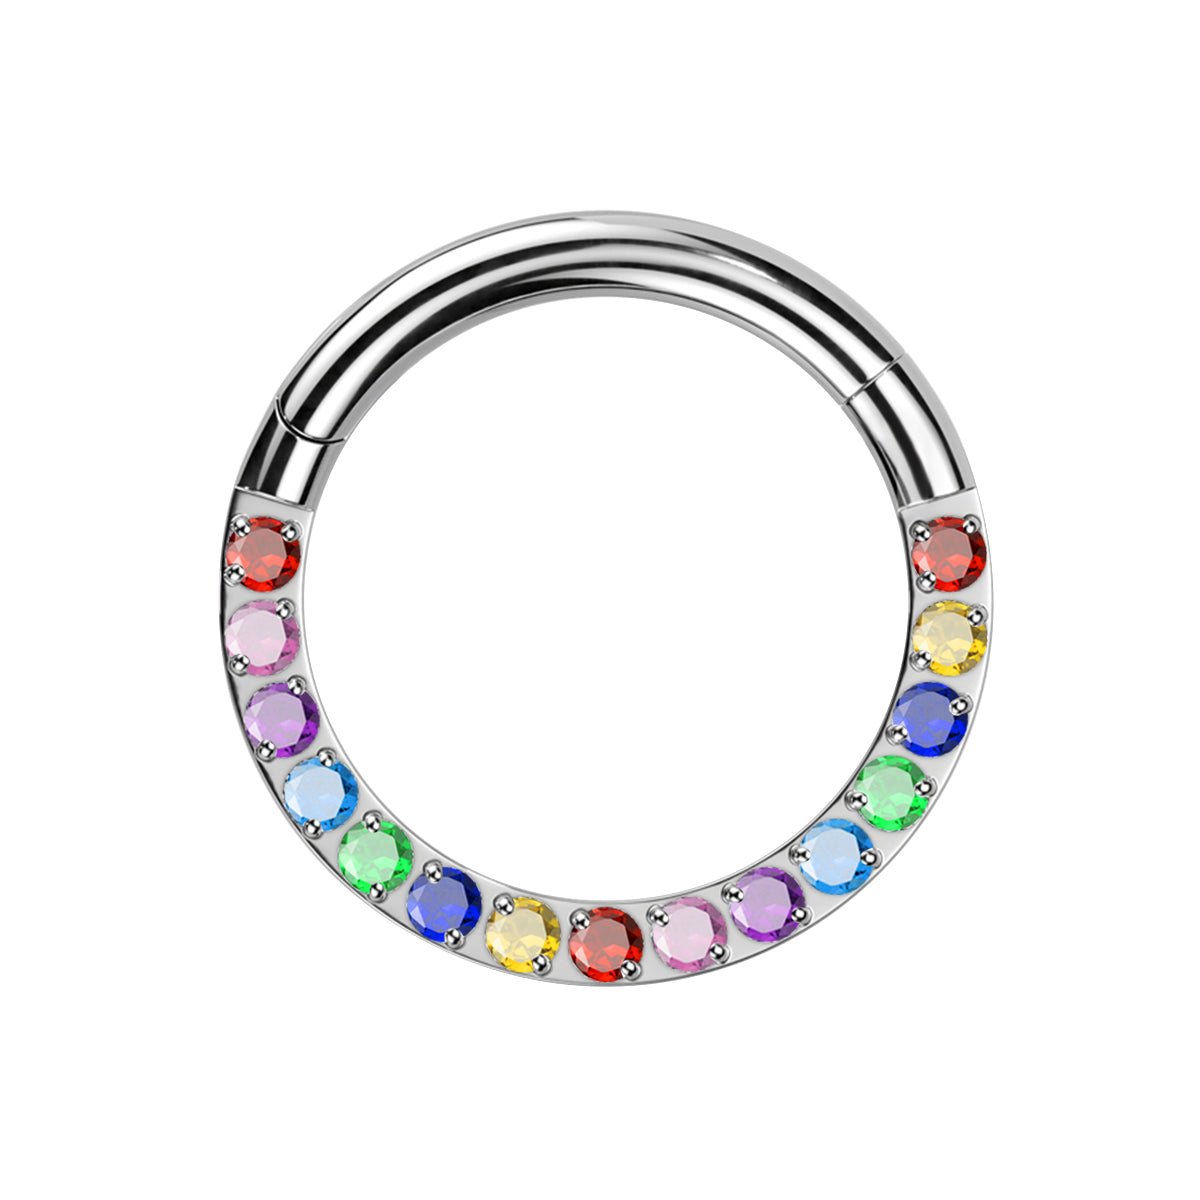 Rainbow Hinged Septum Clicker - Dr. Piercing Aftercare